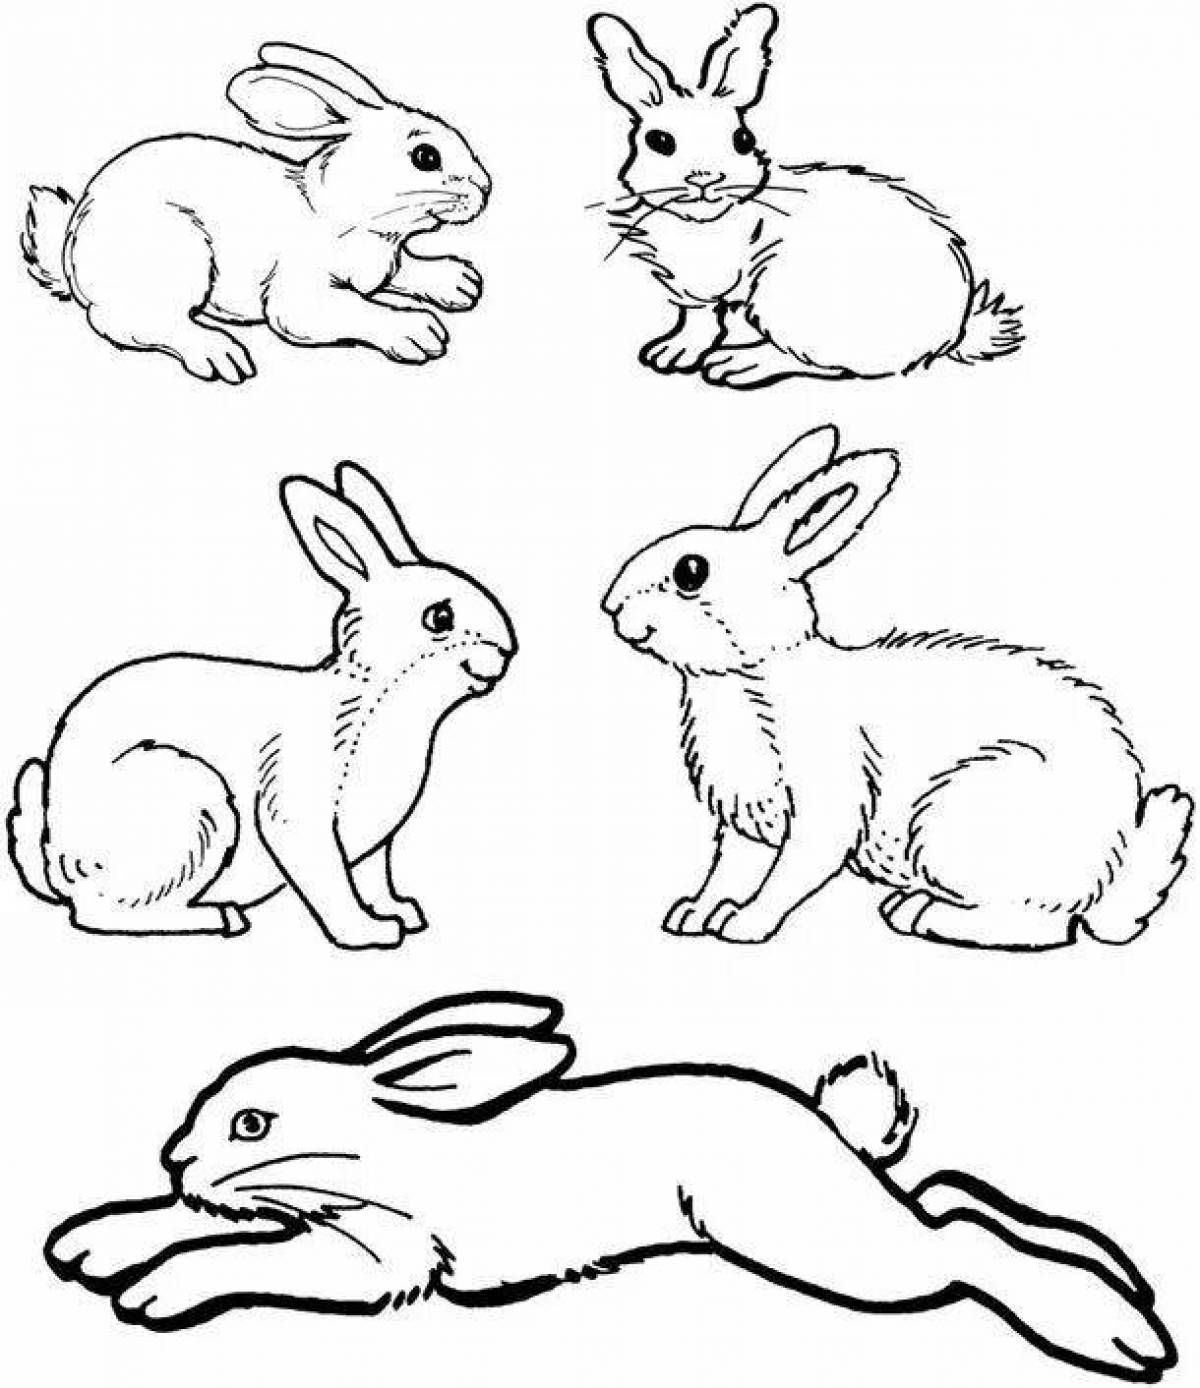 Coloring book shining white hare